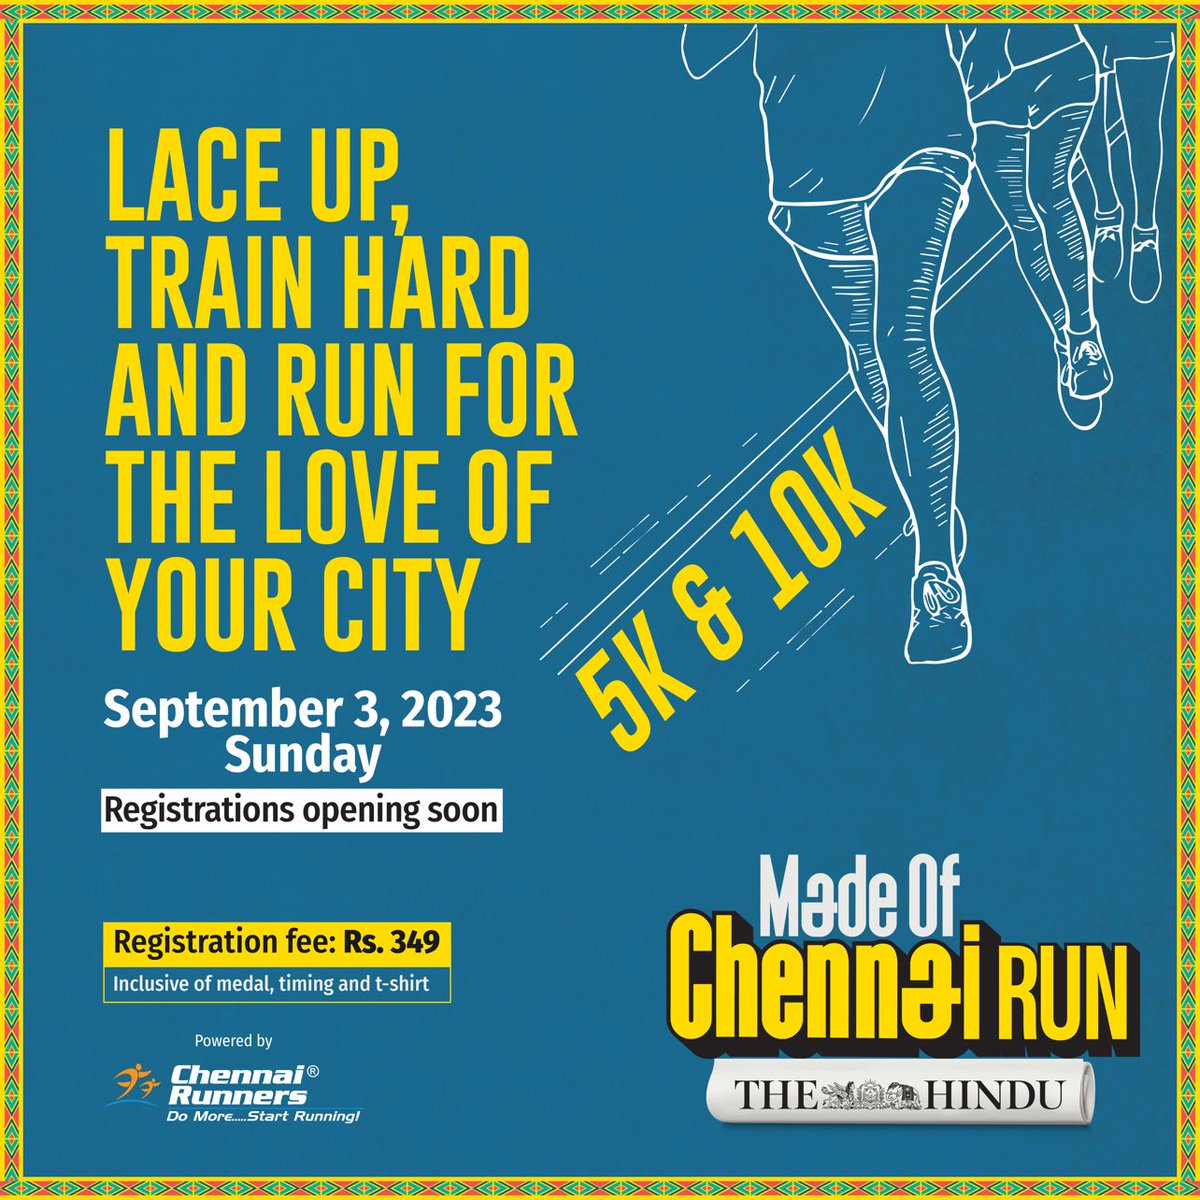 Join @the_hindu  #MadeofChennai Run, powered by #ChennaiRunners, and embrace the thrill of the run!
Mark your calendars for Sunday, September 3, 2023, and get ready to conquer the track in the heart of Chennai. Register Now :

reg.myraceindia.com/MRTS/MOCR23